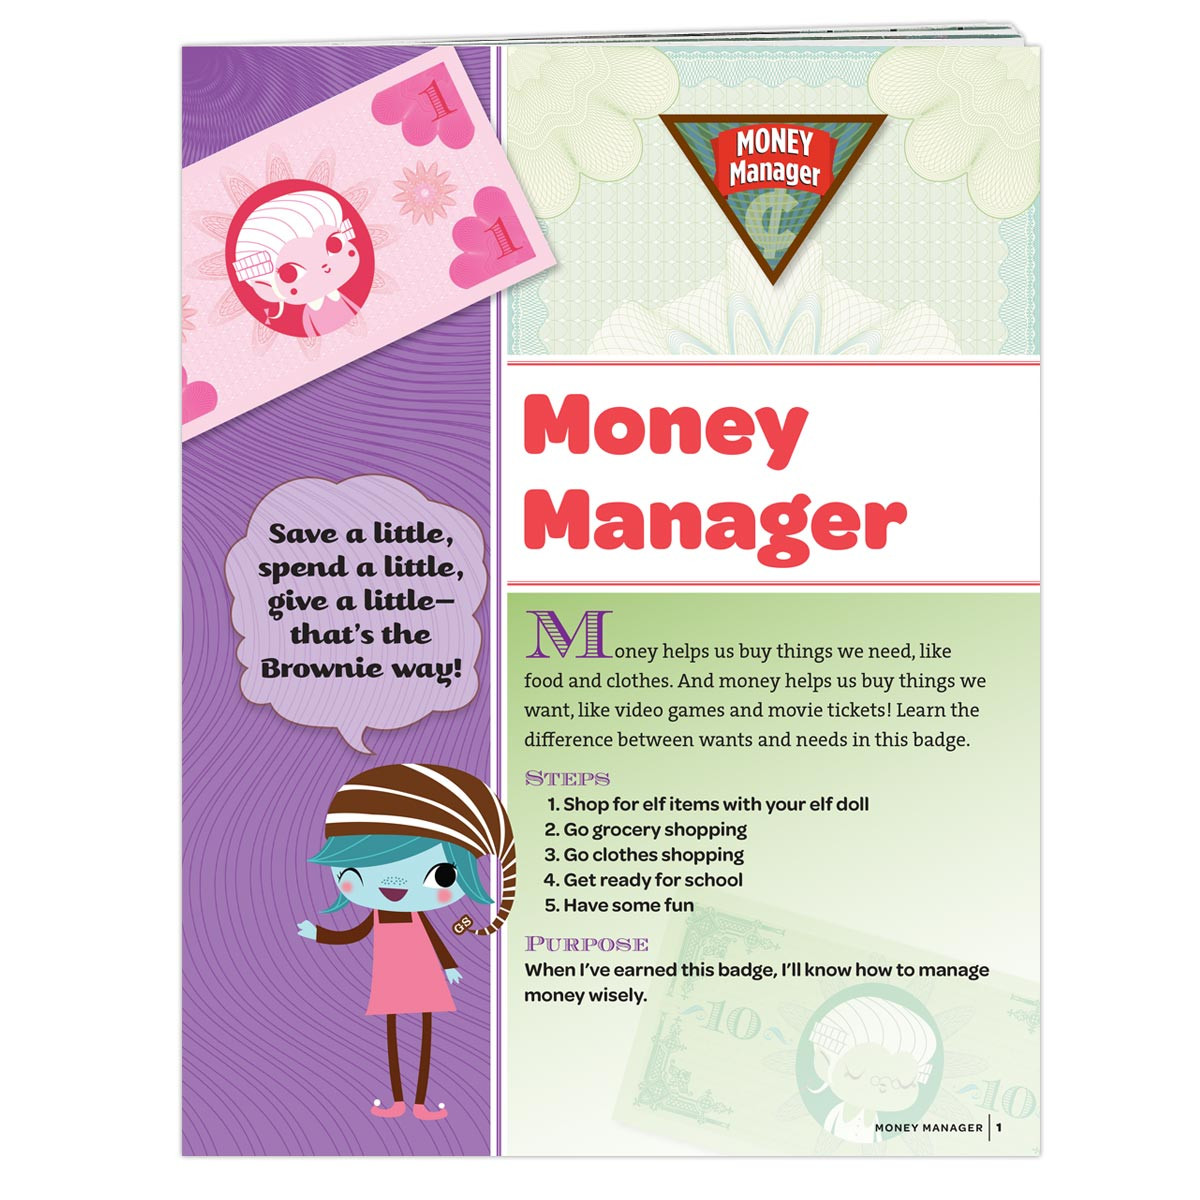 Br. Money Manager REQ